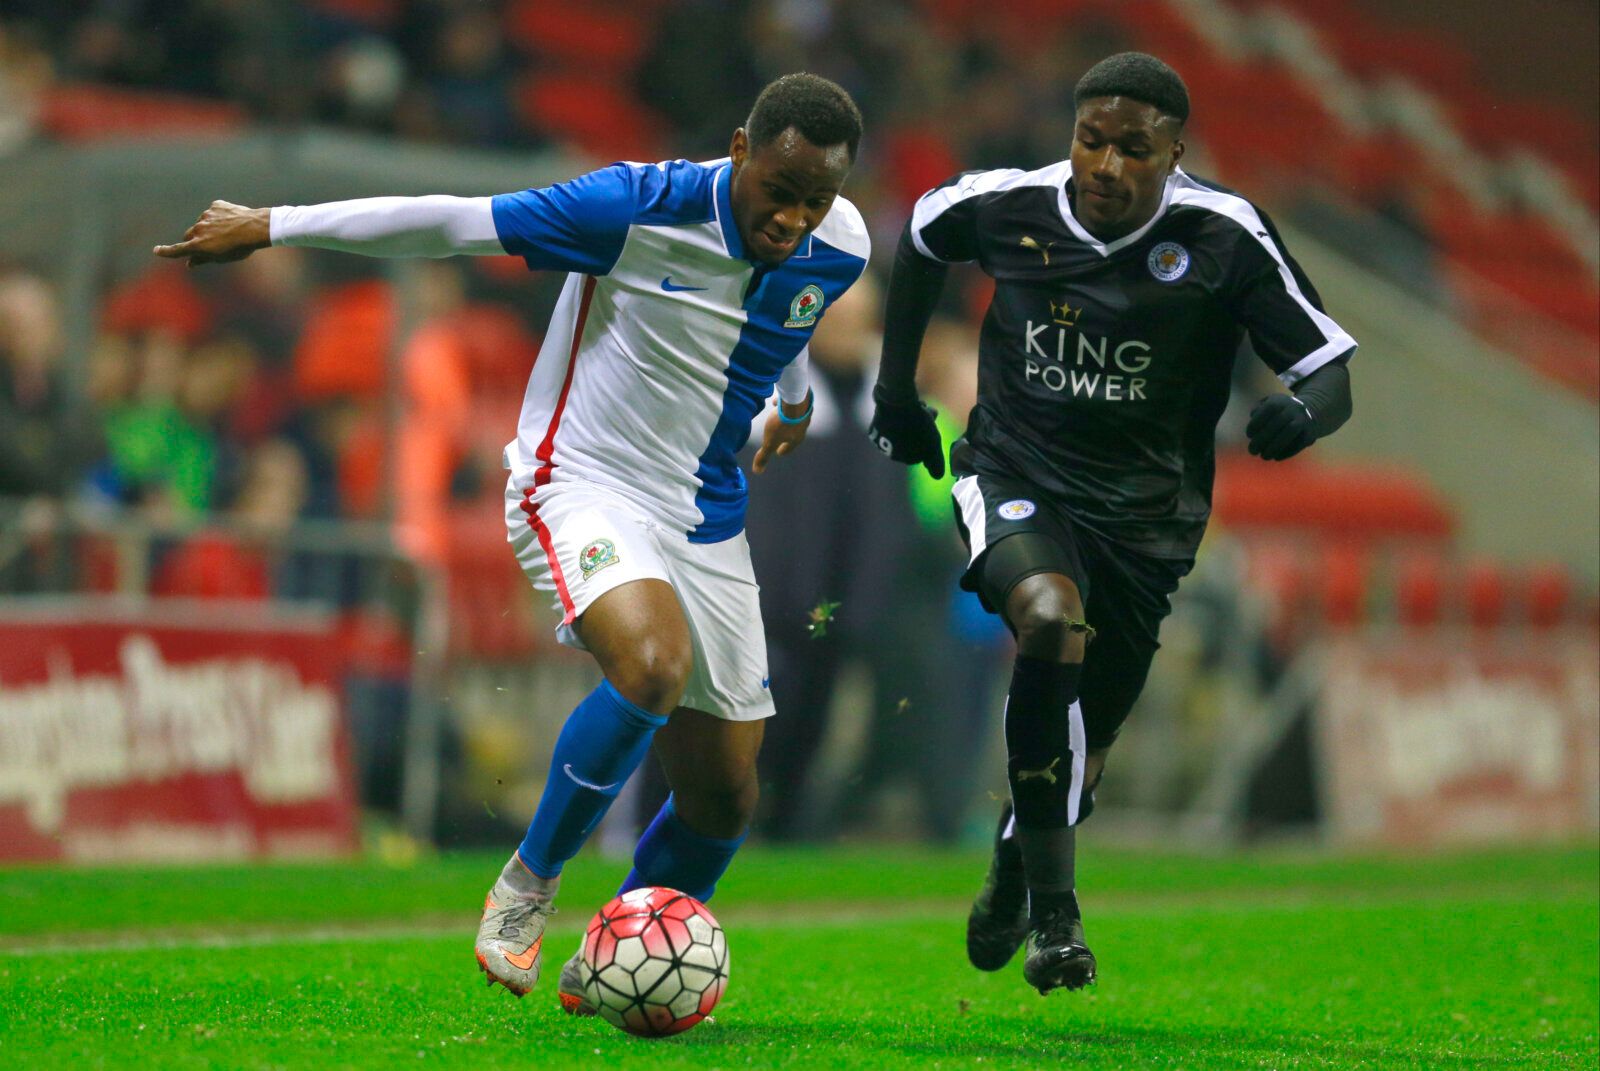 Football - Blackburn Rovers v Leicester City - FA Youth Cup Fourth Round - Leigh Sports Village - 11/1/16
Blackburn Rovers' Ryan Nyambe and Leicester City's Josh Felix Eppiah in action
Mandatory Credit: Action Images / Jason Cairnduff
Livepic
EDITORIAL USE ONLY.